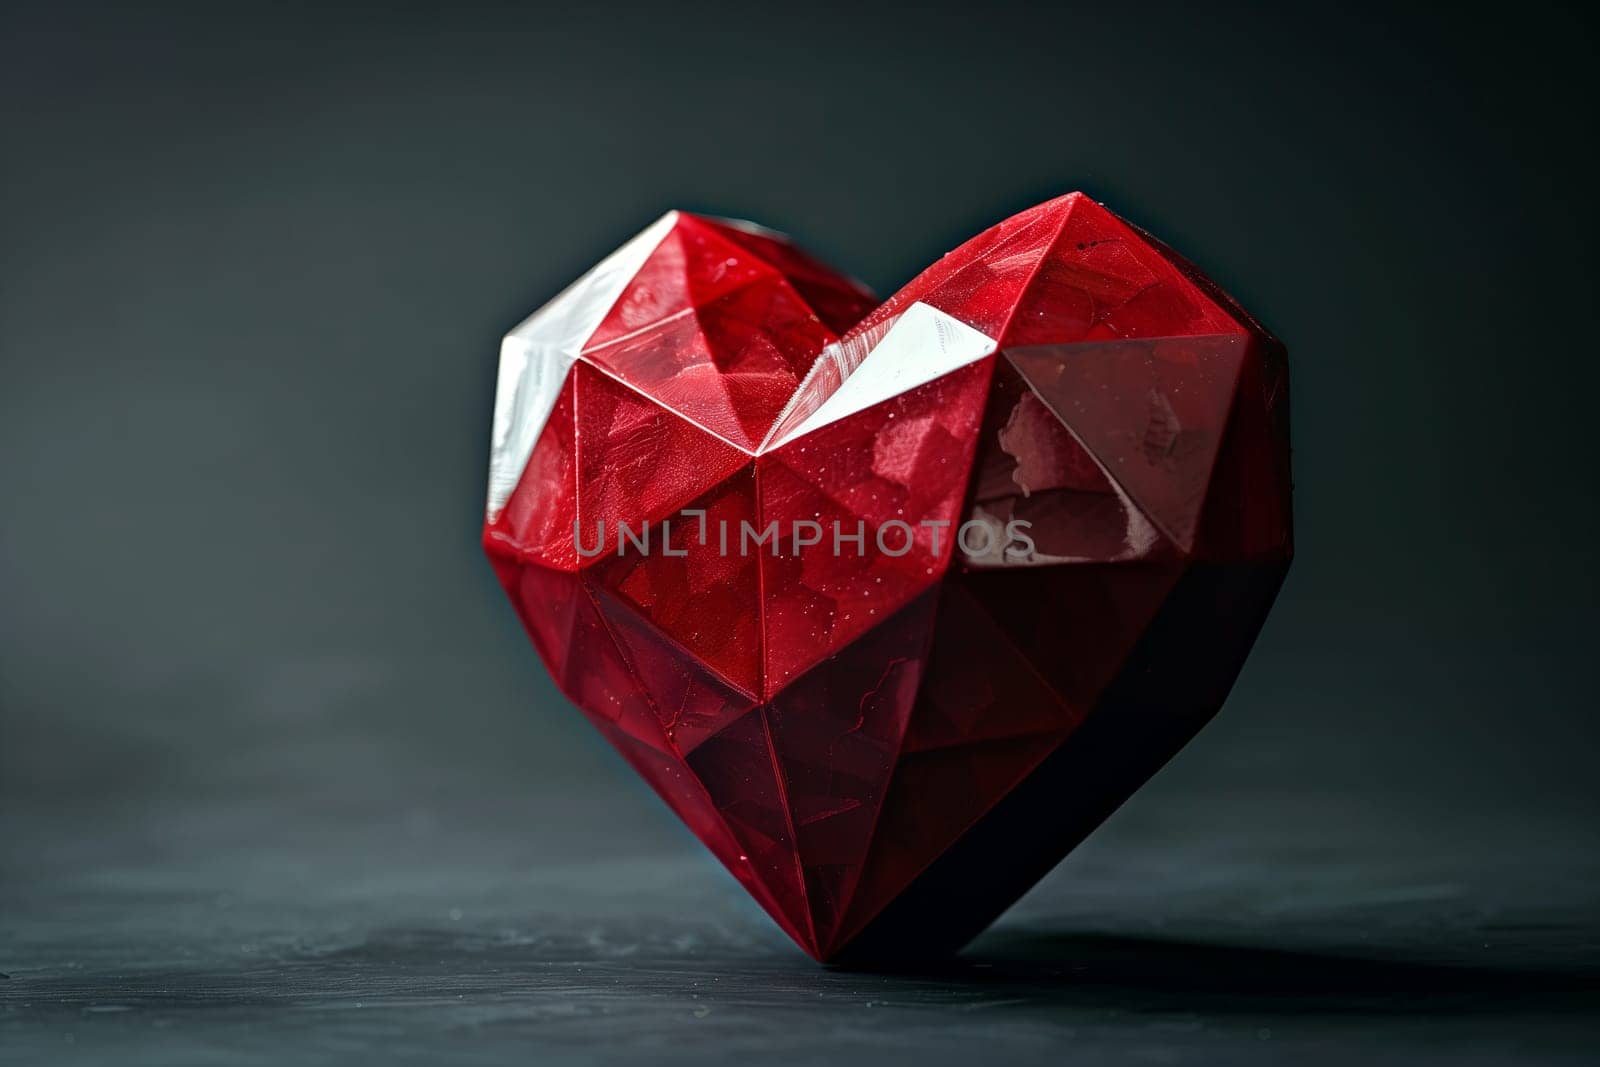 A creative arts piece featuring a red diamond heart sitting on a table. The jewellery design showcases symmetry, crafted with electric blue and magenta patterns. Artistry at its finest